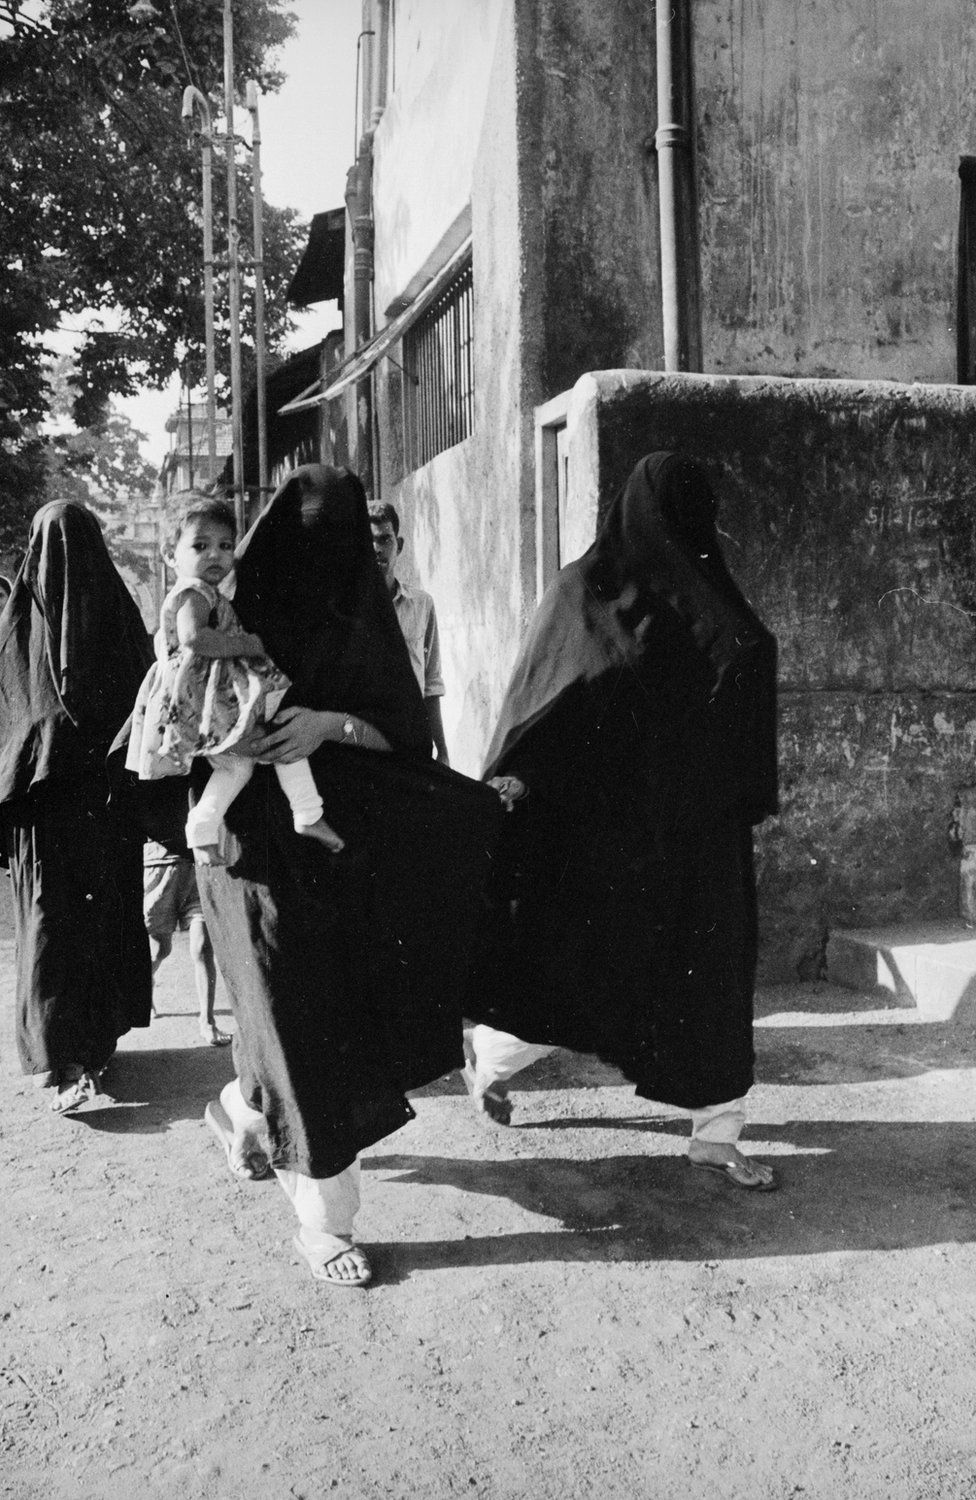 Women in burkas are on their way to vote during the Indian elections in 1967.